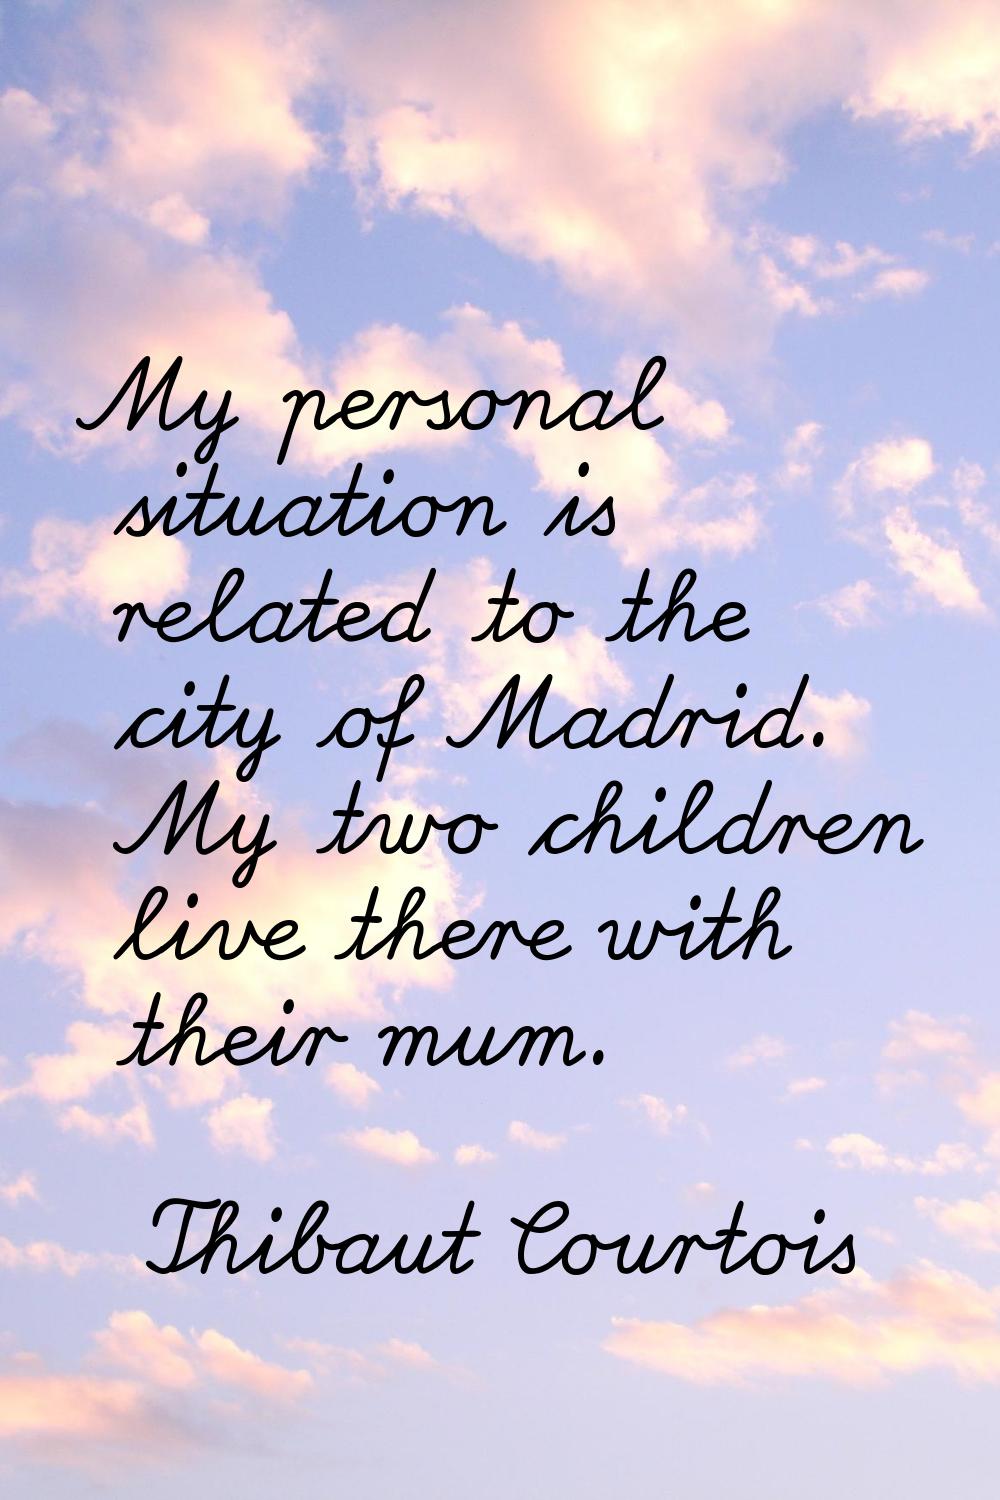 My personal situation is related to the city of Madrid. My two children live there with their mum.